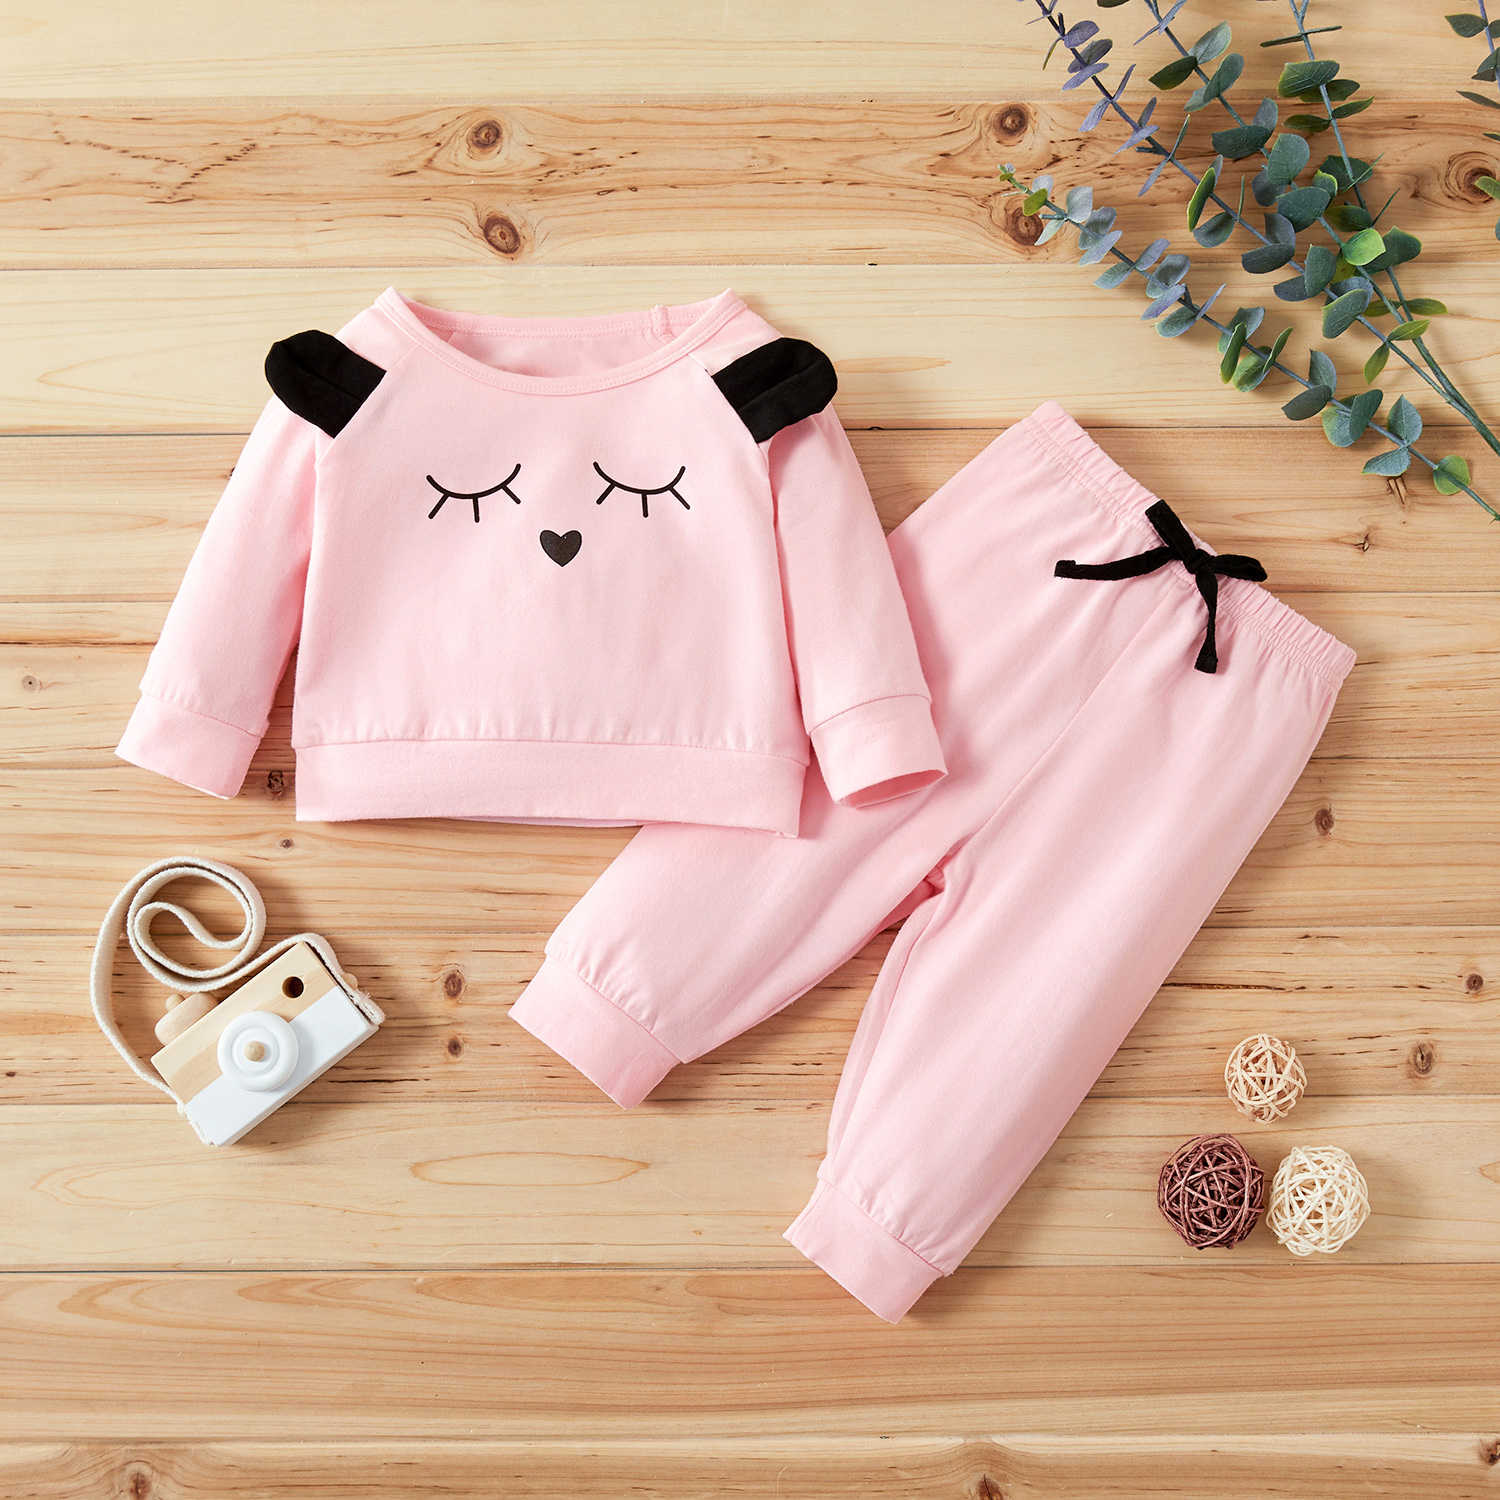 Baby Girl Casual Sets